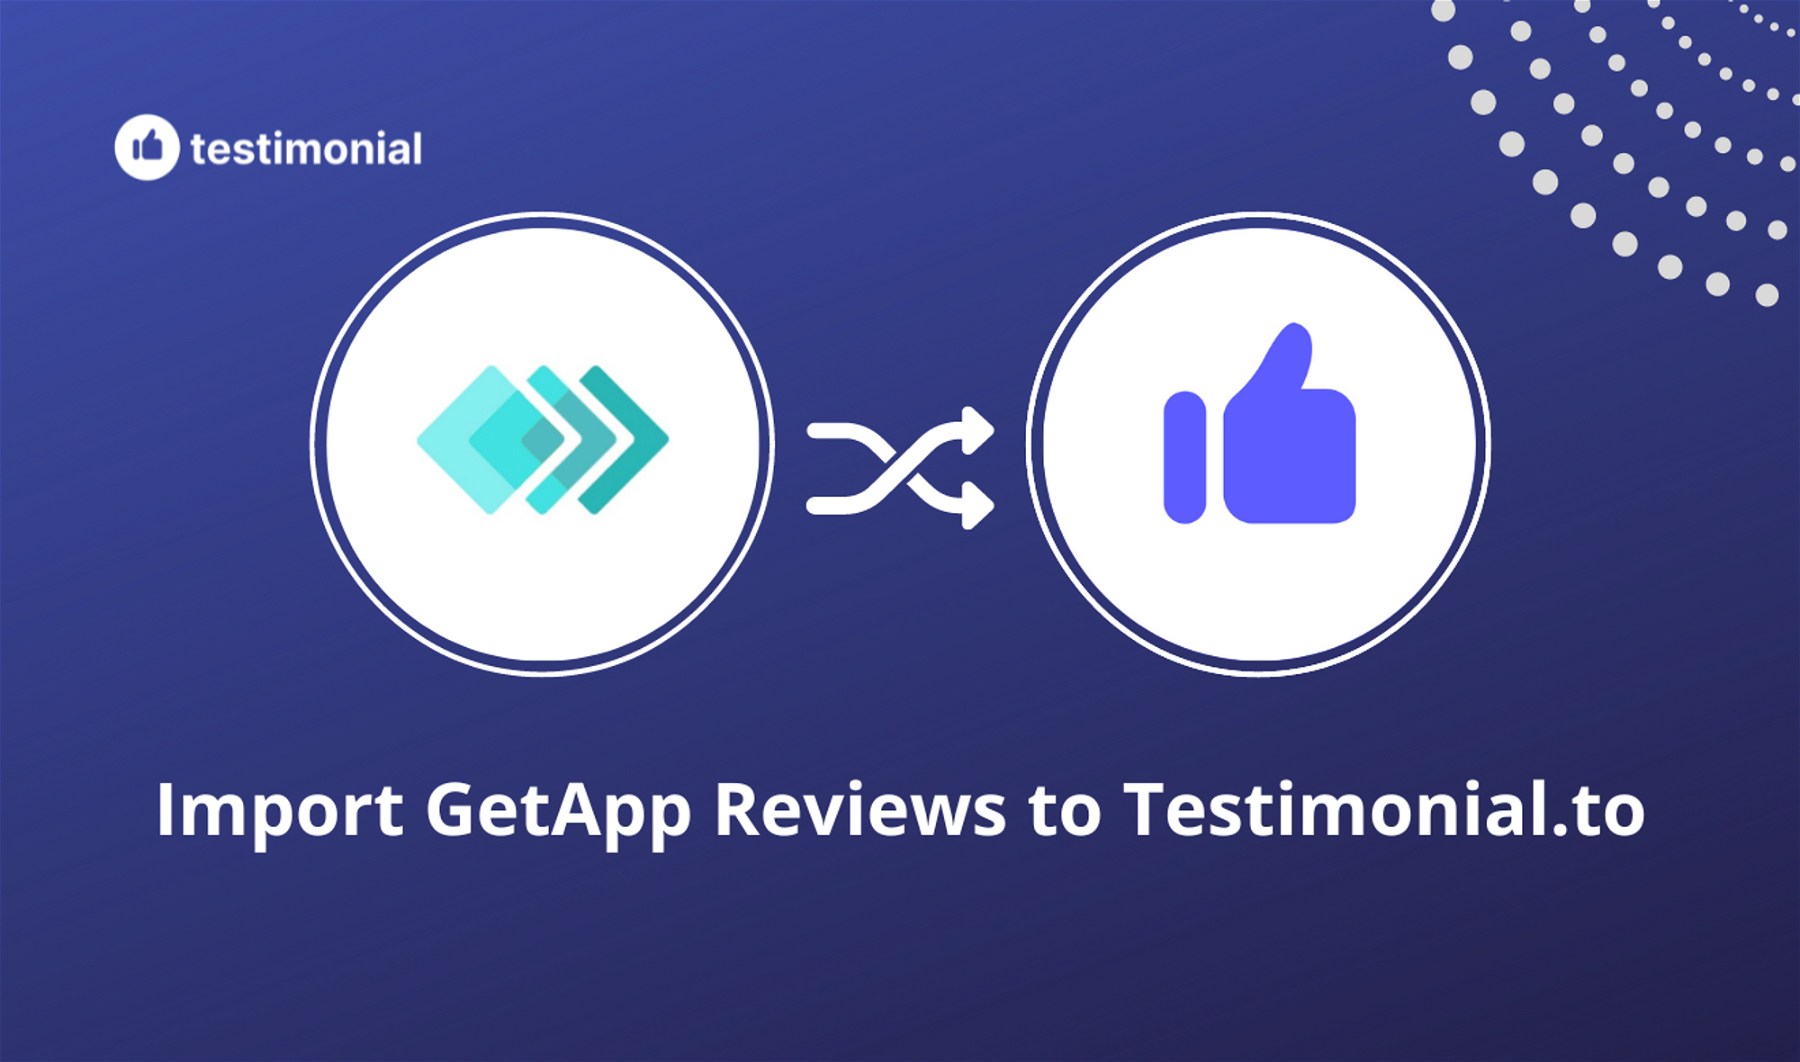 How to embed GetApp Reviews on Your Website